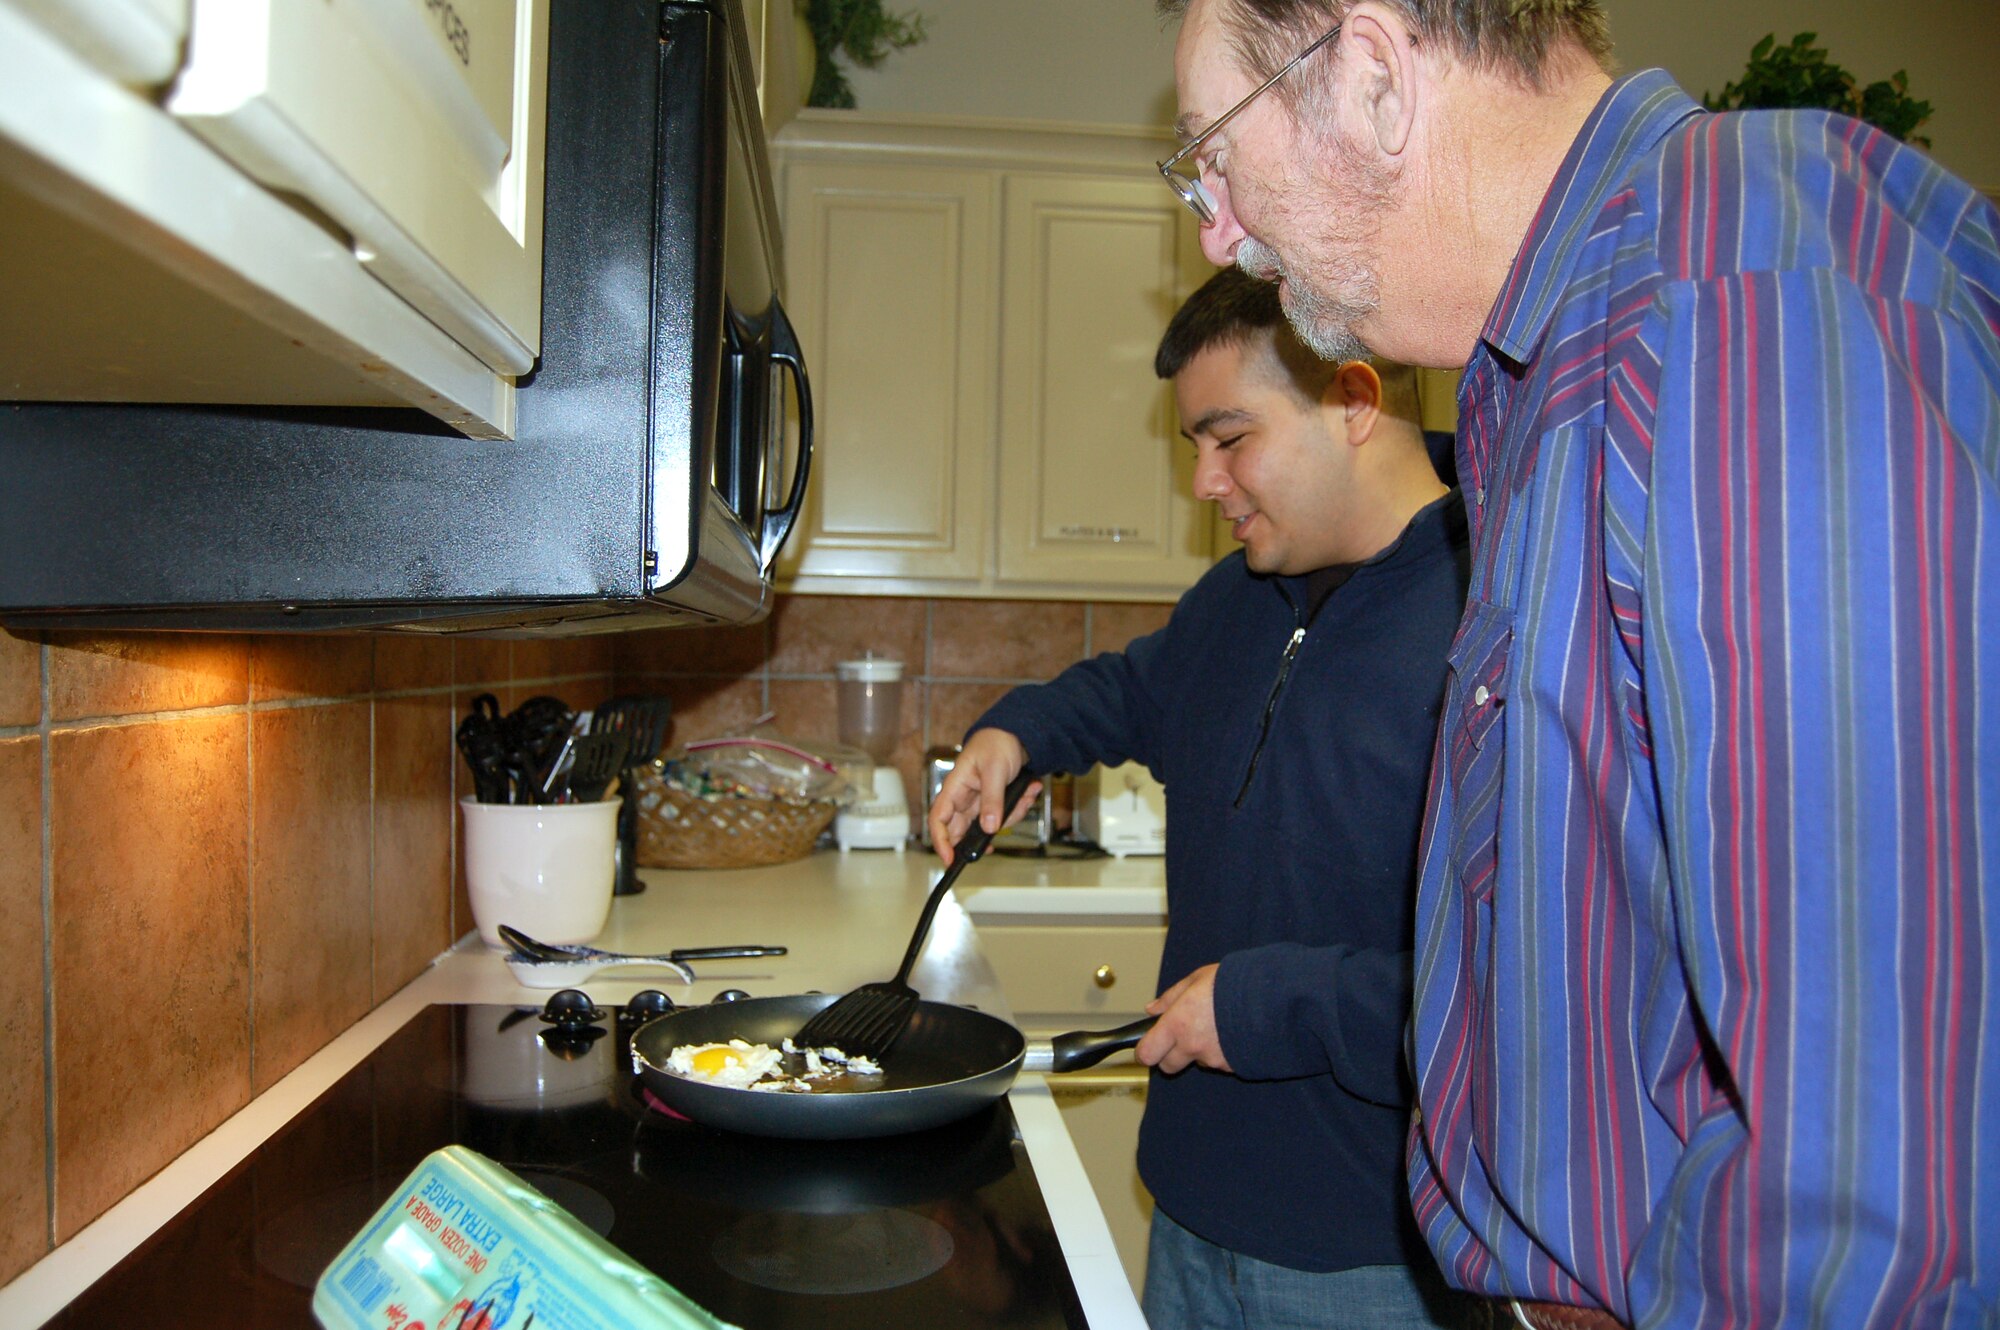 Senior Airman Edward Alvarado and Tom Pennington strike up a conversation as Airman Alvarado cooks an egg in the kitchen of the Fisher House at Lackland Air Force Base, Texas.  Residents at the Fisher House often become quite close because of their shared hardships. The Fisher House offers a place to stay for family members of people hospitalized at military medical centers.  (U.S. Air Force photo/Staff Sgt. Jeremy Larlee)